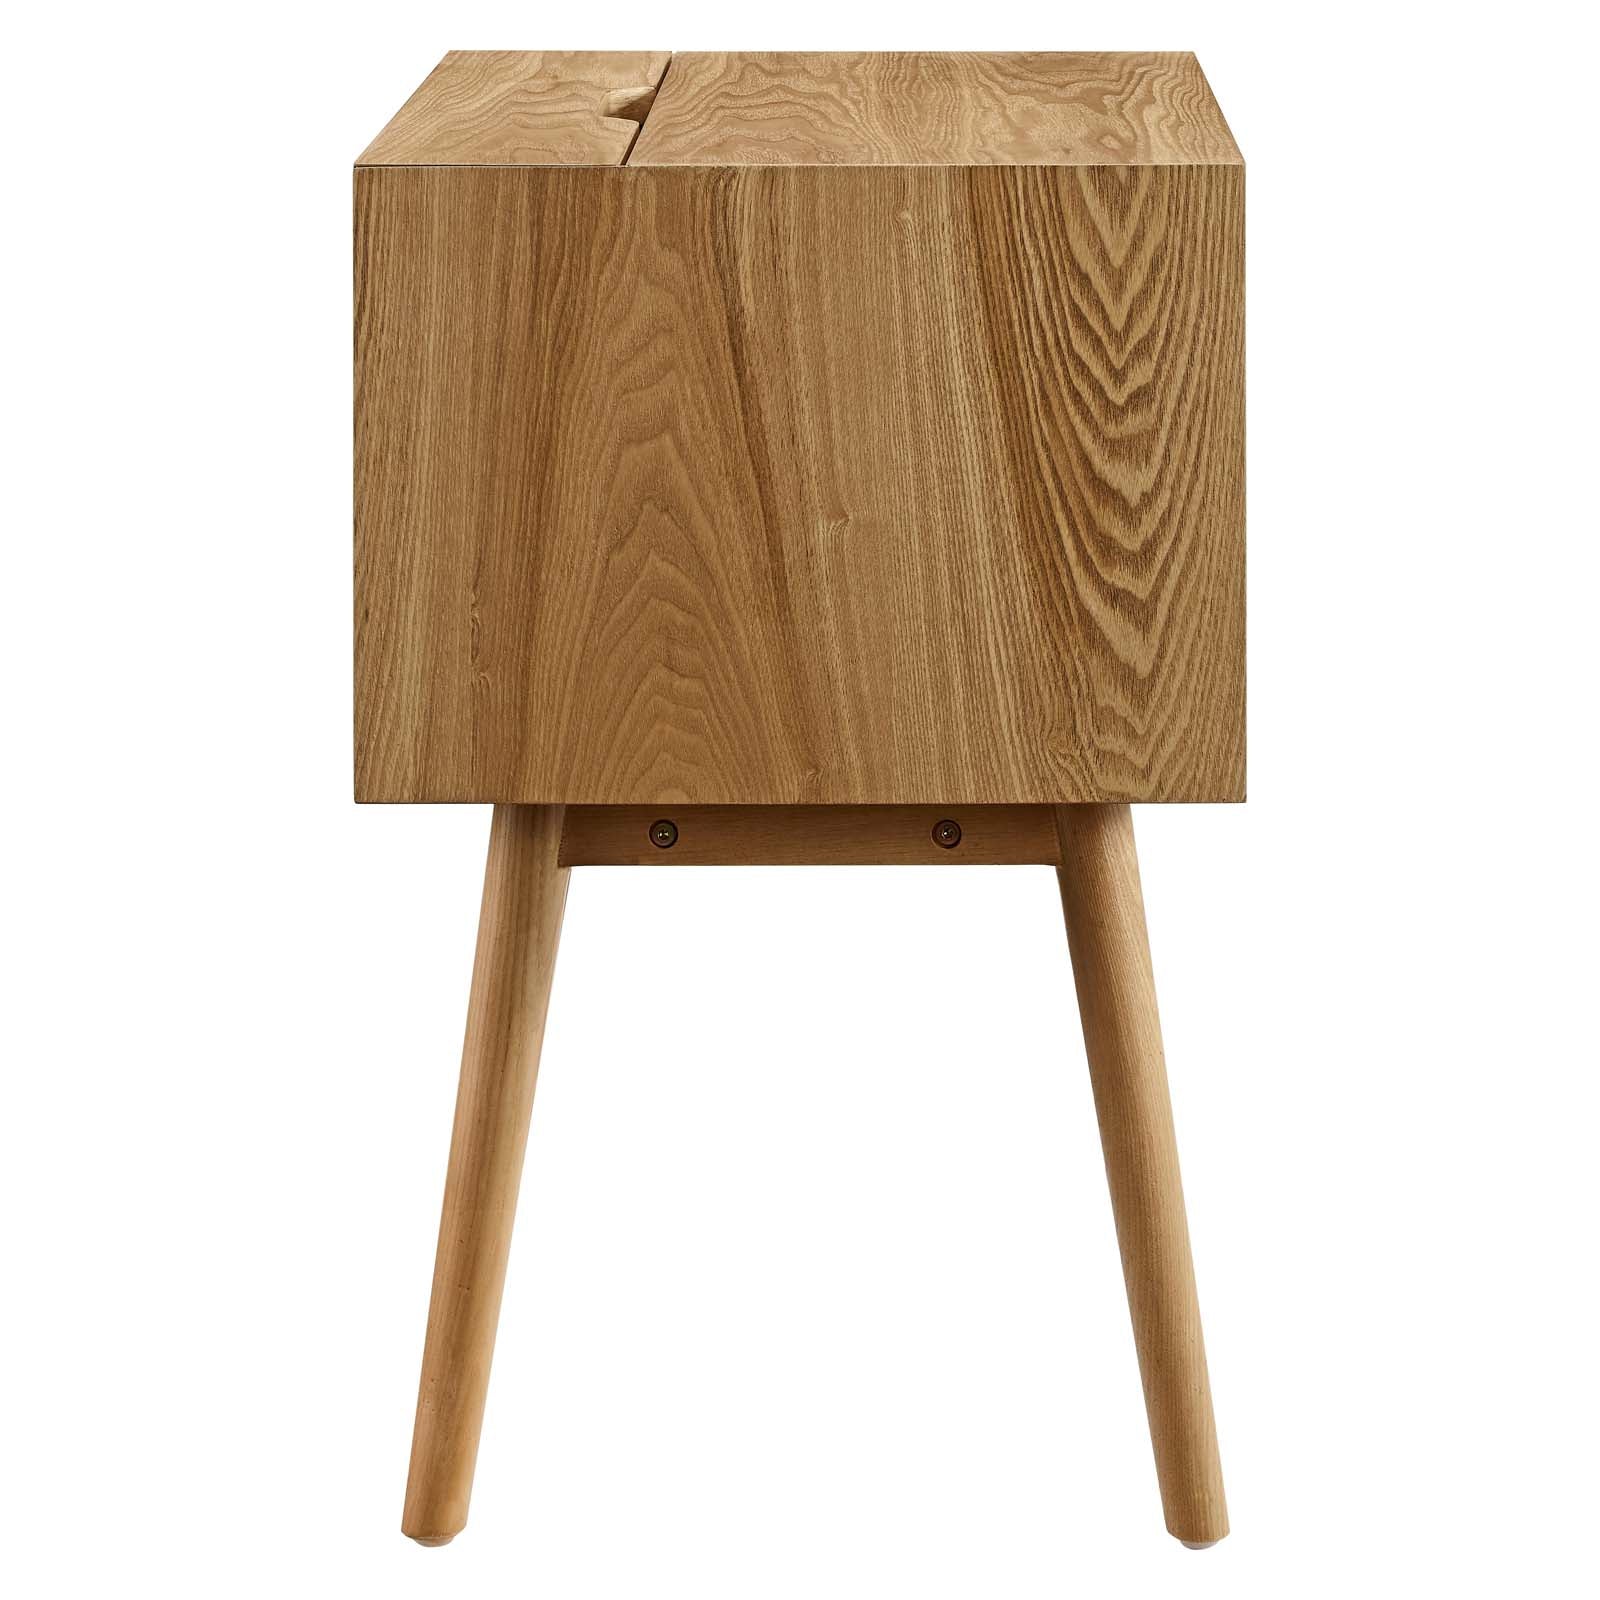 Modway Nightstands & Side Tables - Ember Wood Nightstand With USB Ports Natural Natural